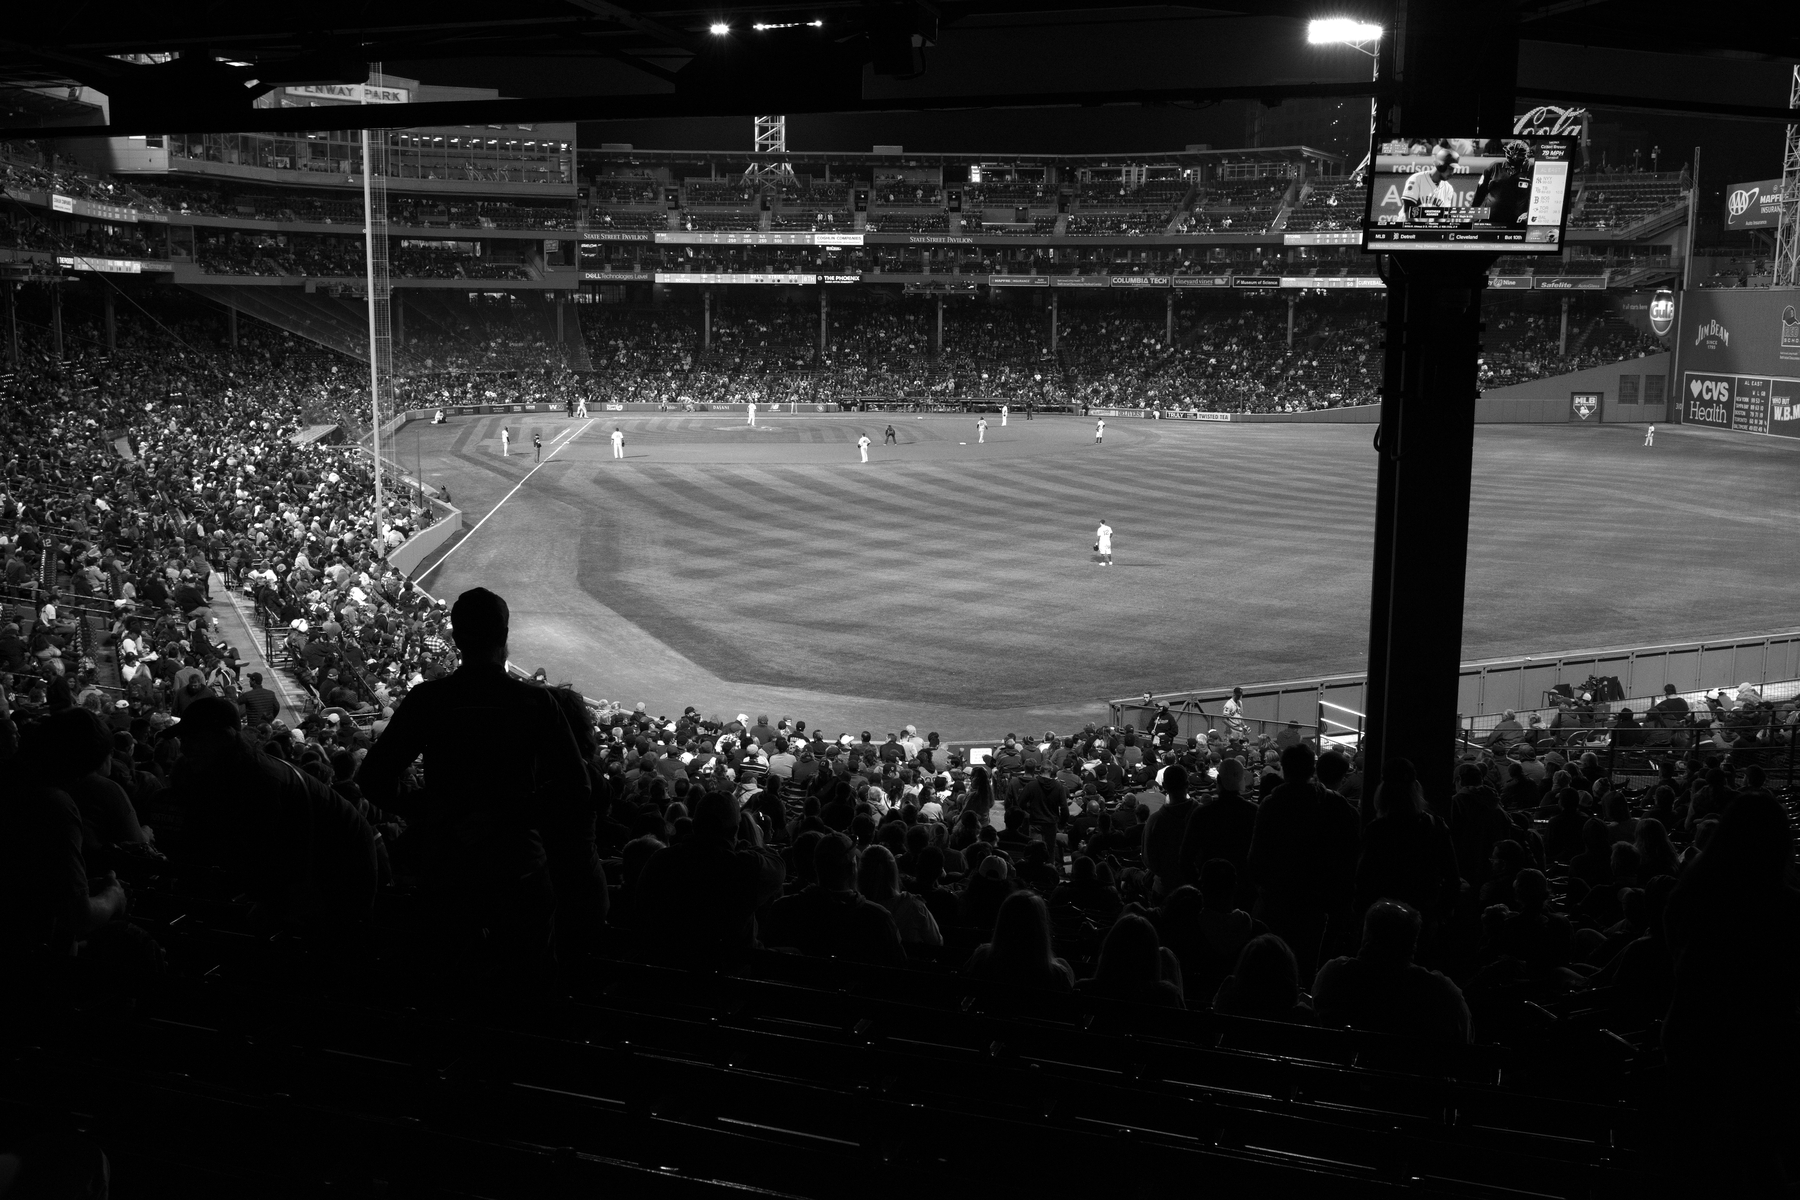 Fenway Park in black and white, with a view from right field